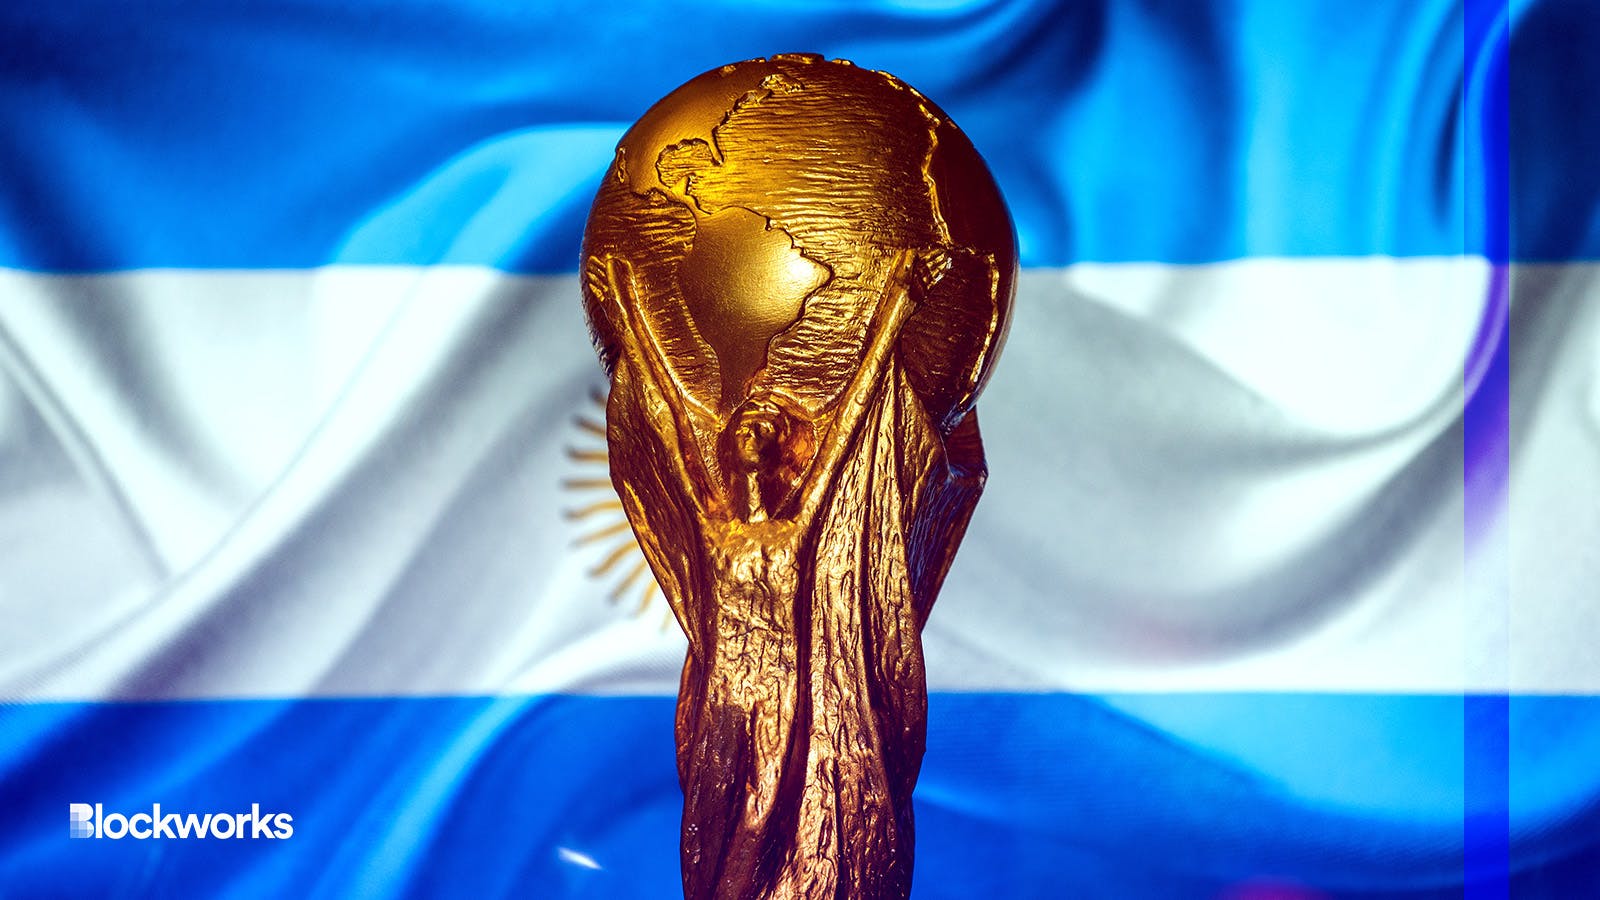 Exact worth of World Cup trophy revealed as it's officially the most  valuable prize in football